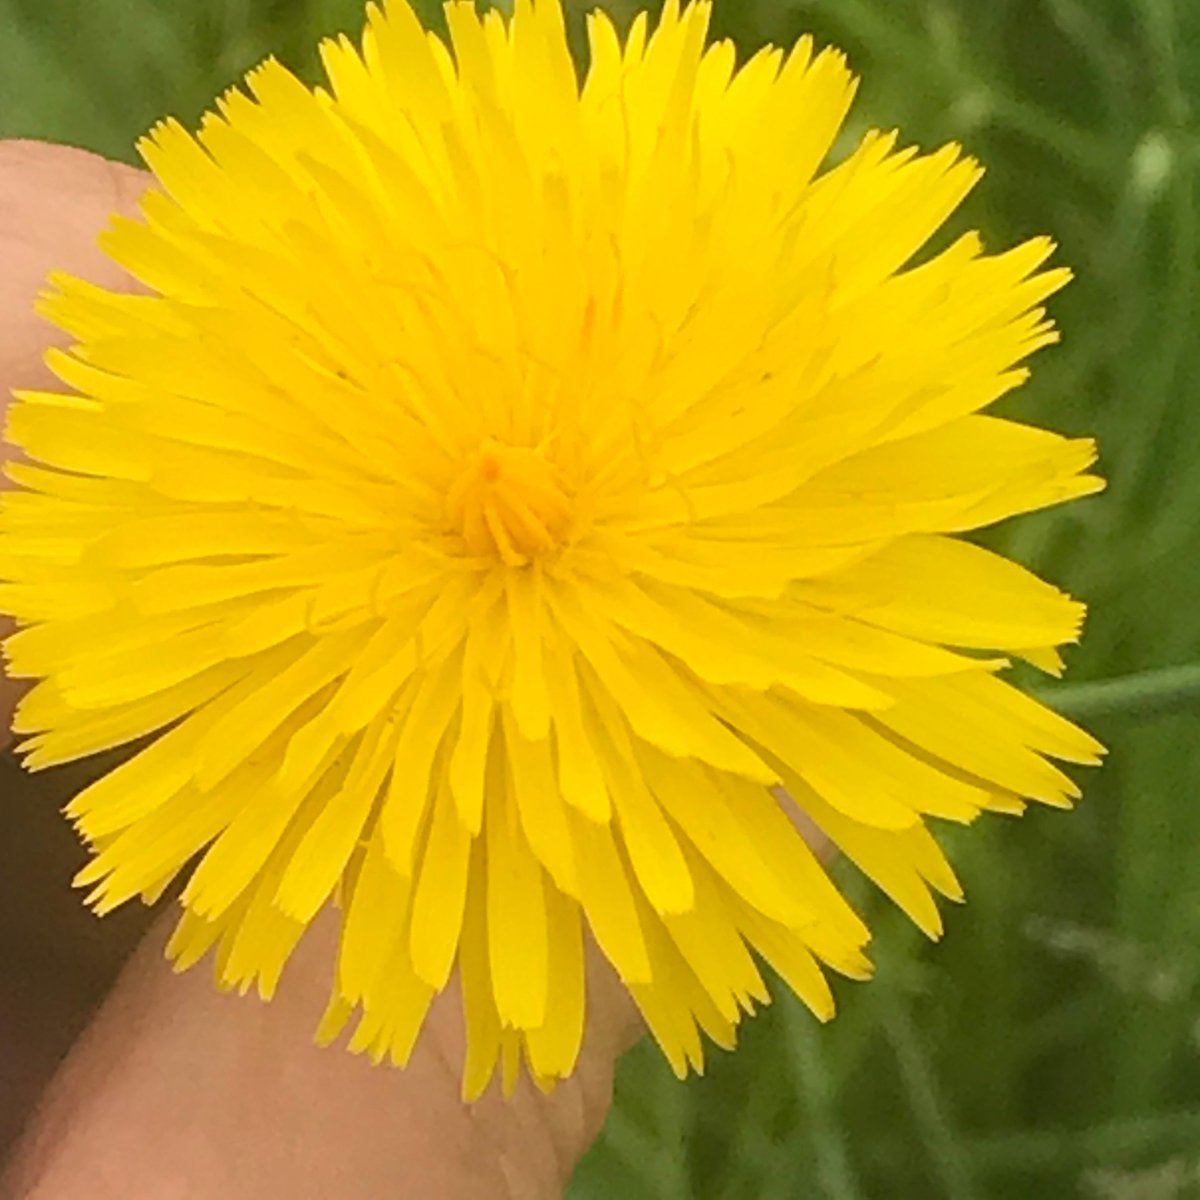 According to the BSBI, there are over 250 species of dandelion recorded throughout Britain and Ireland. The Taraxacum family, is one of the hardest for botanist to get to grips with. #InternationalDayOfTheDandelion #WildflowerHour #DandelionChallenge